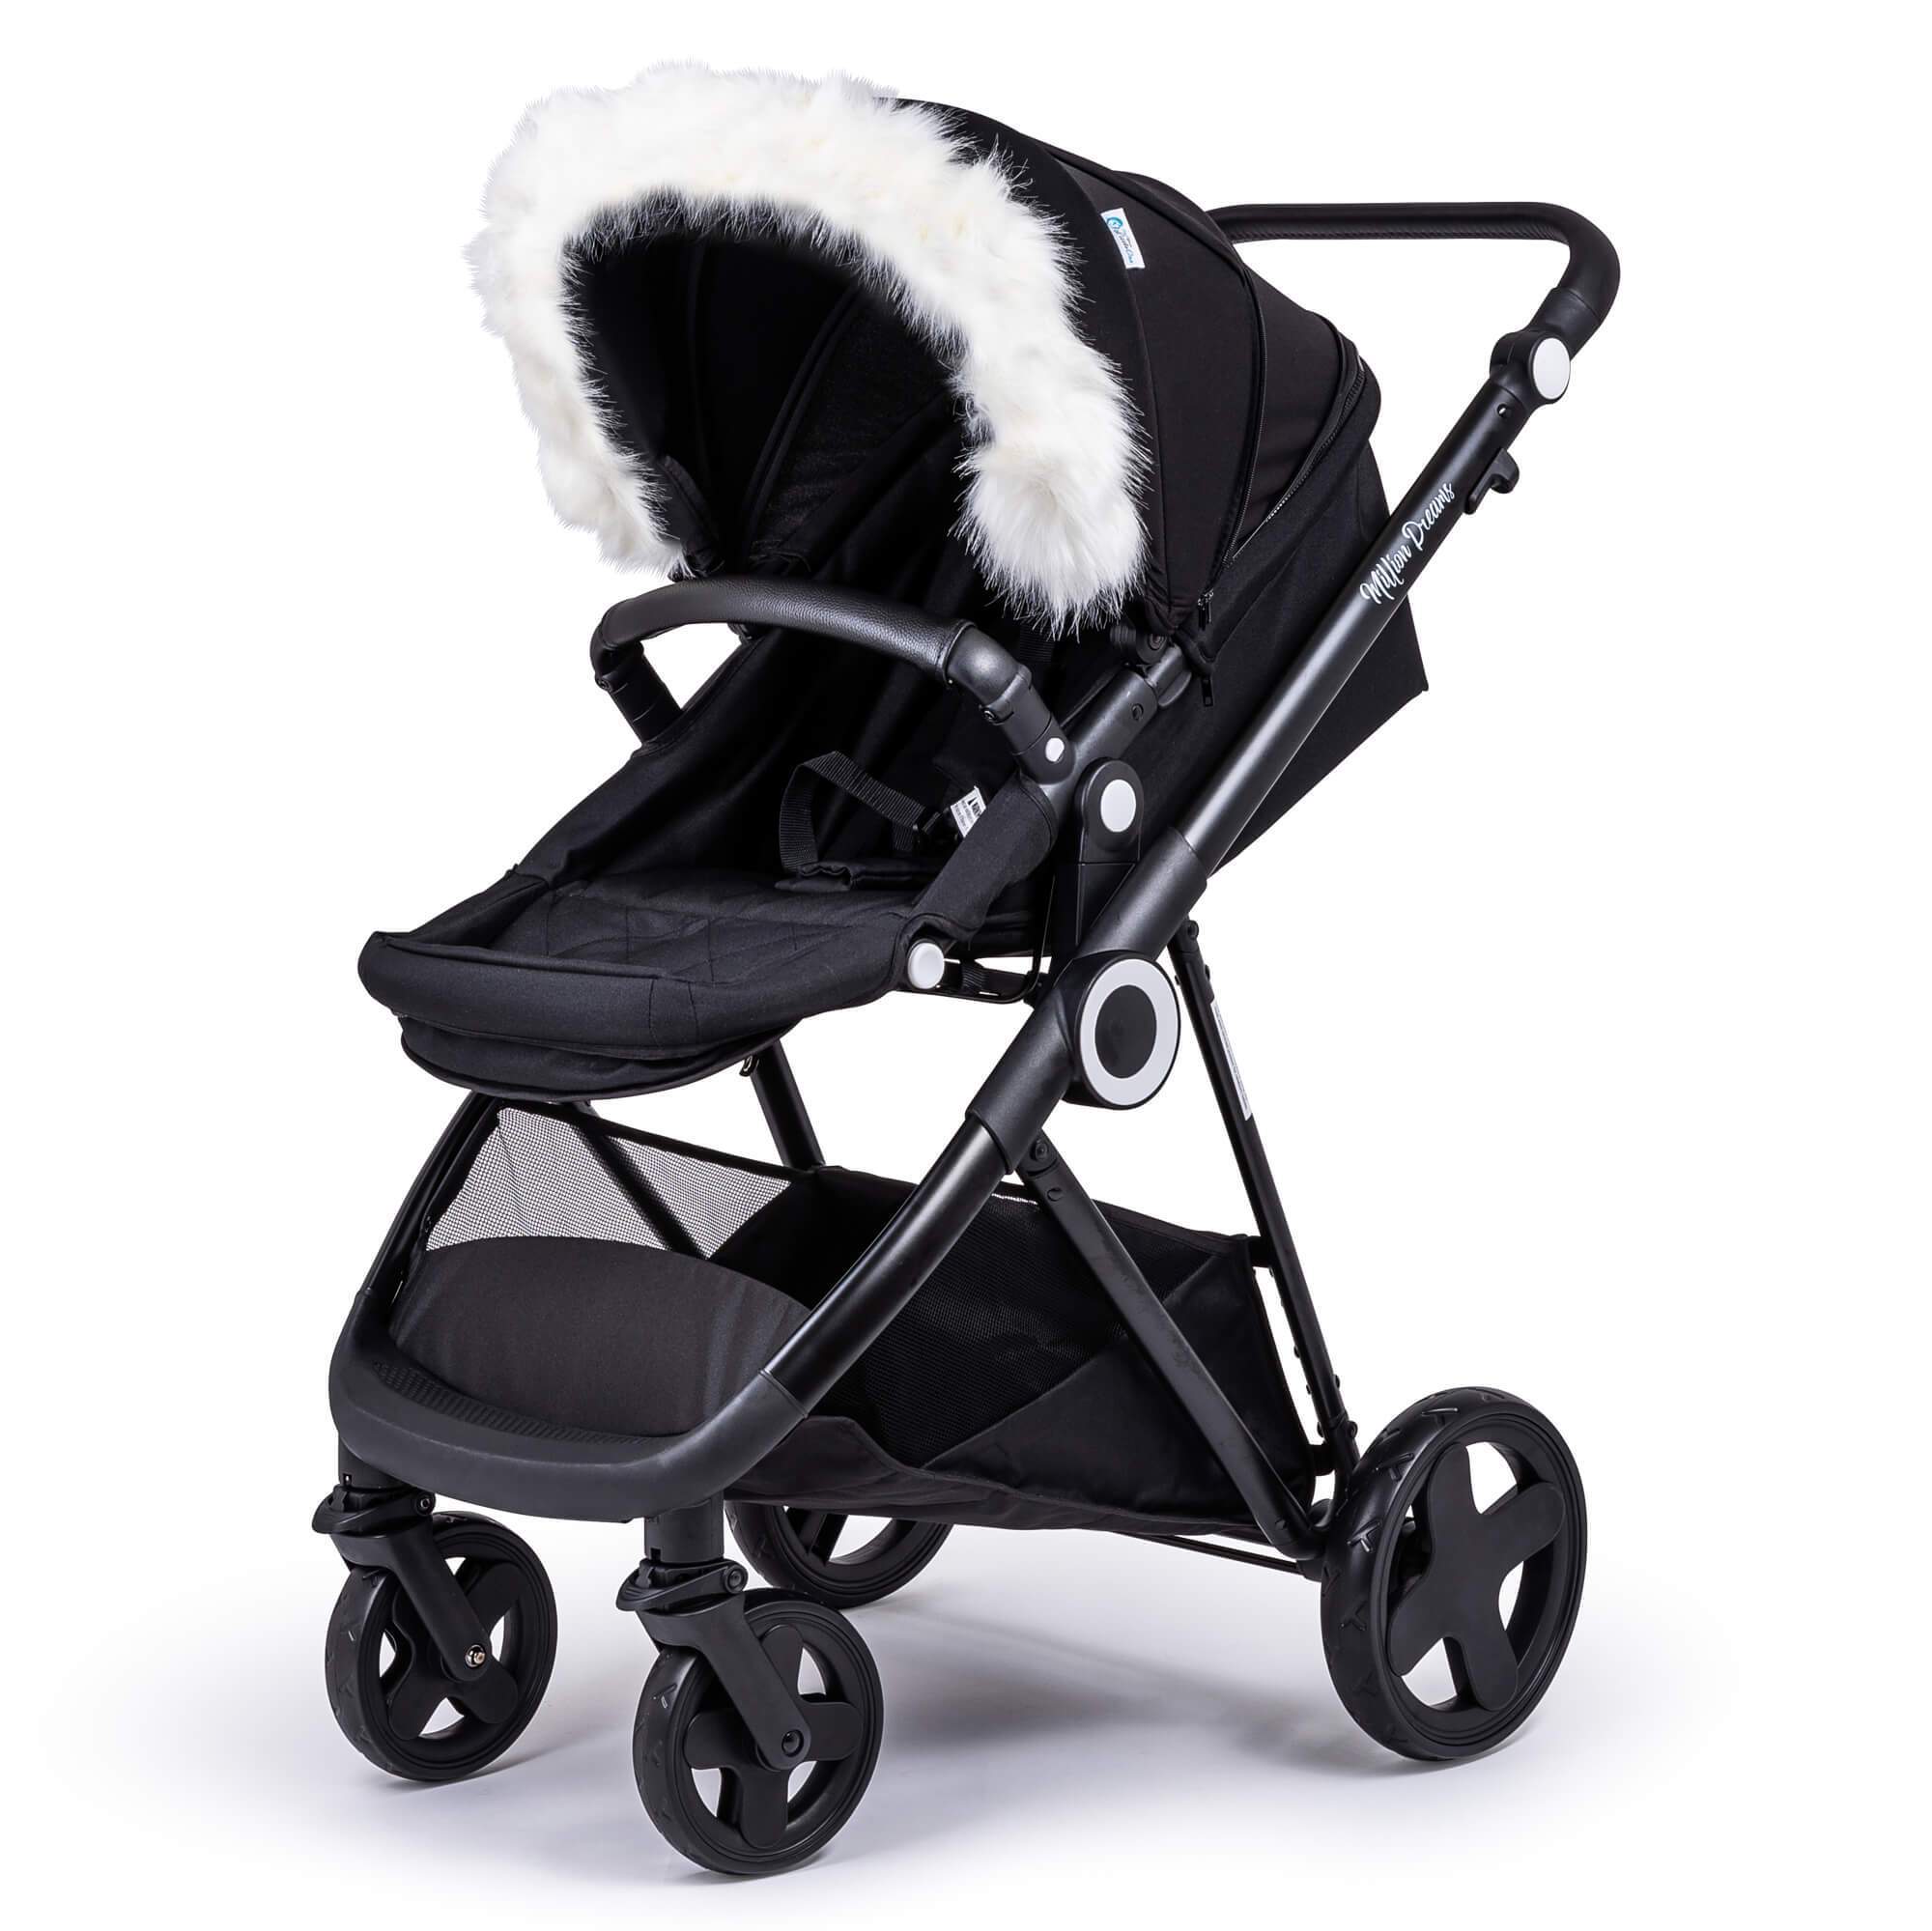 Pram Fur Hood Trim Attachment for Pushchair Compatible with Bebecar - White / Fits All Models | For Your Little One